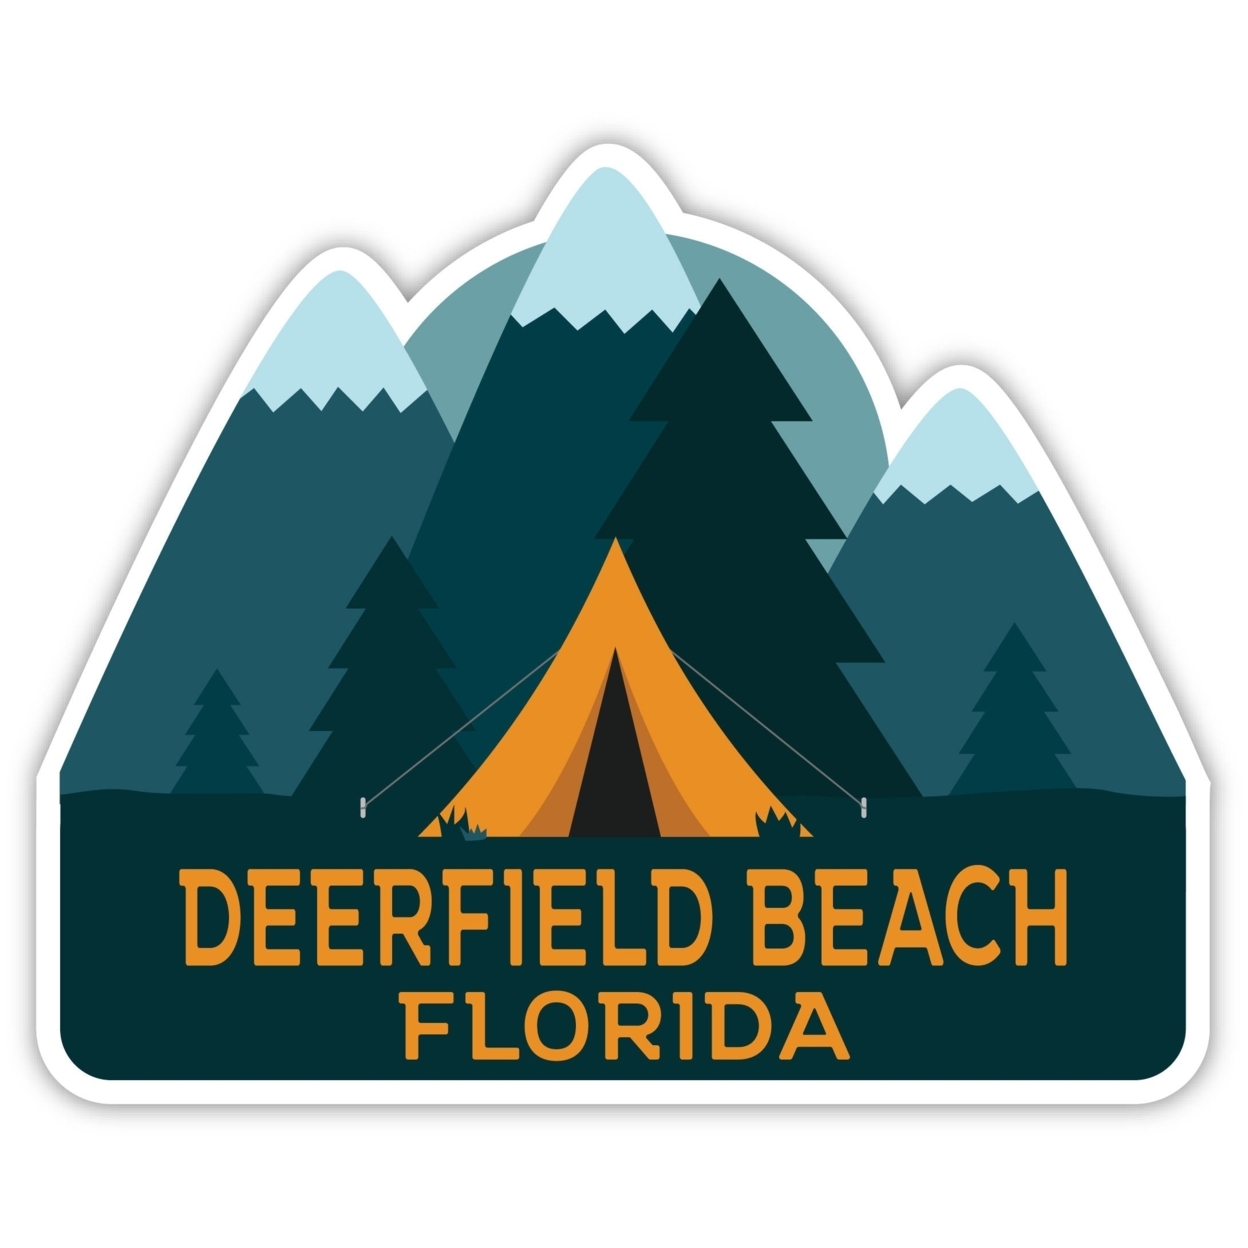 Deerfield Beach Florida Souvenir Decorative Stickers (Choose Theme And Size) - 4-Pack, 12-Inch, Tent